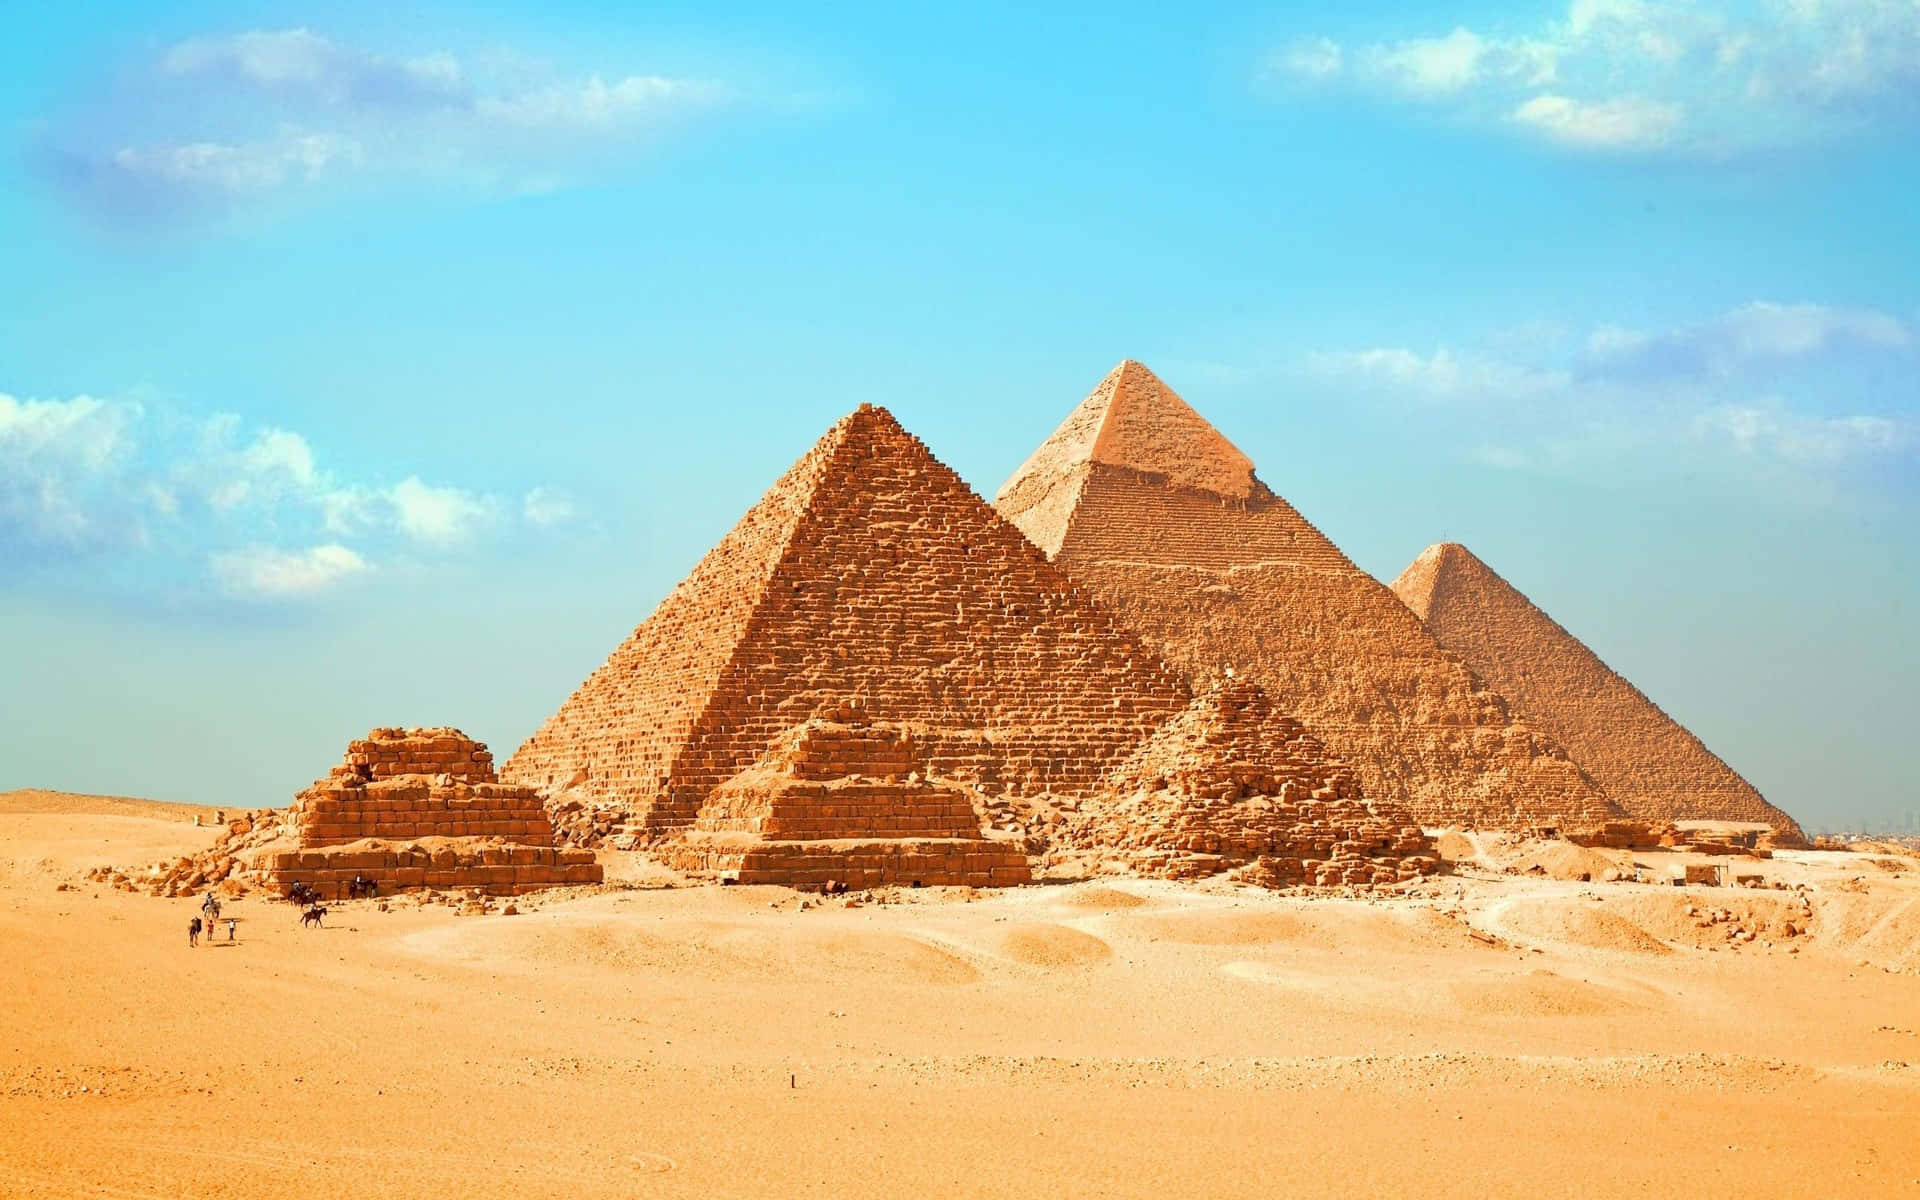 Magnificent Pyramids of Giza under a breathtaking sunset